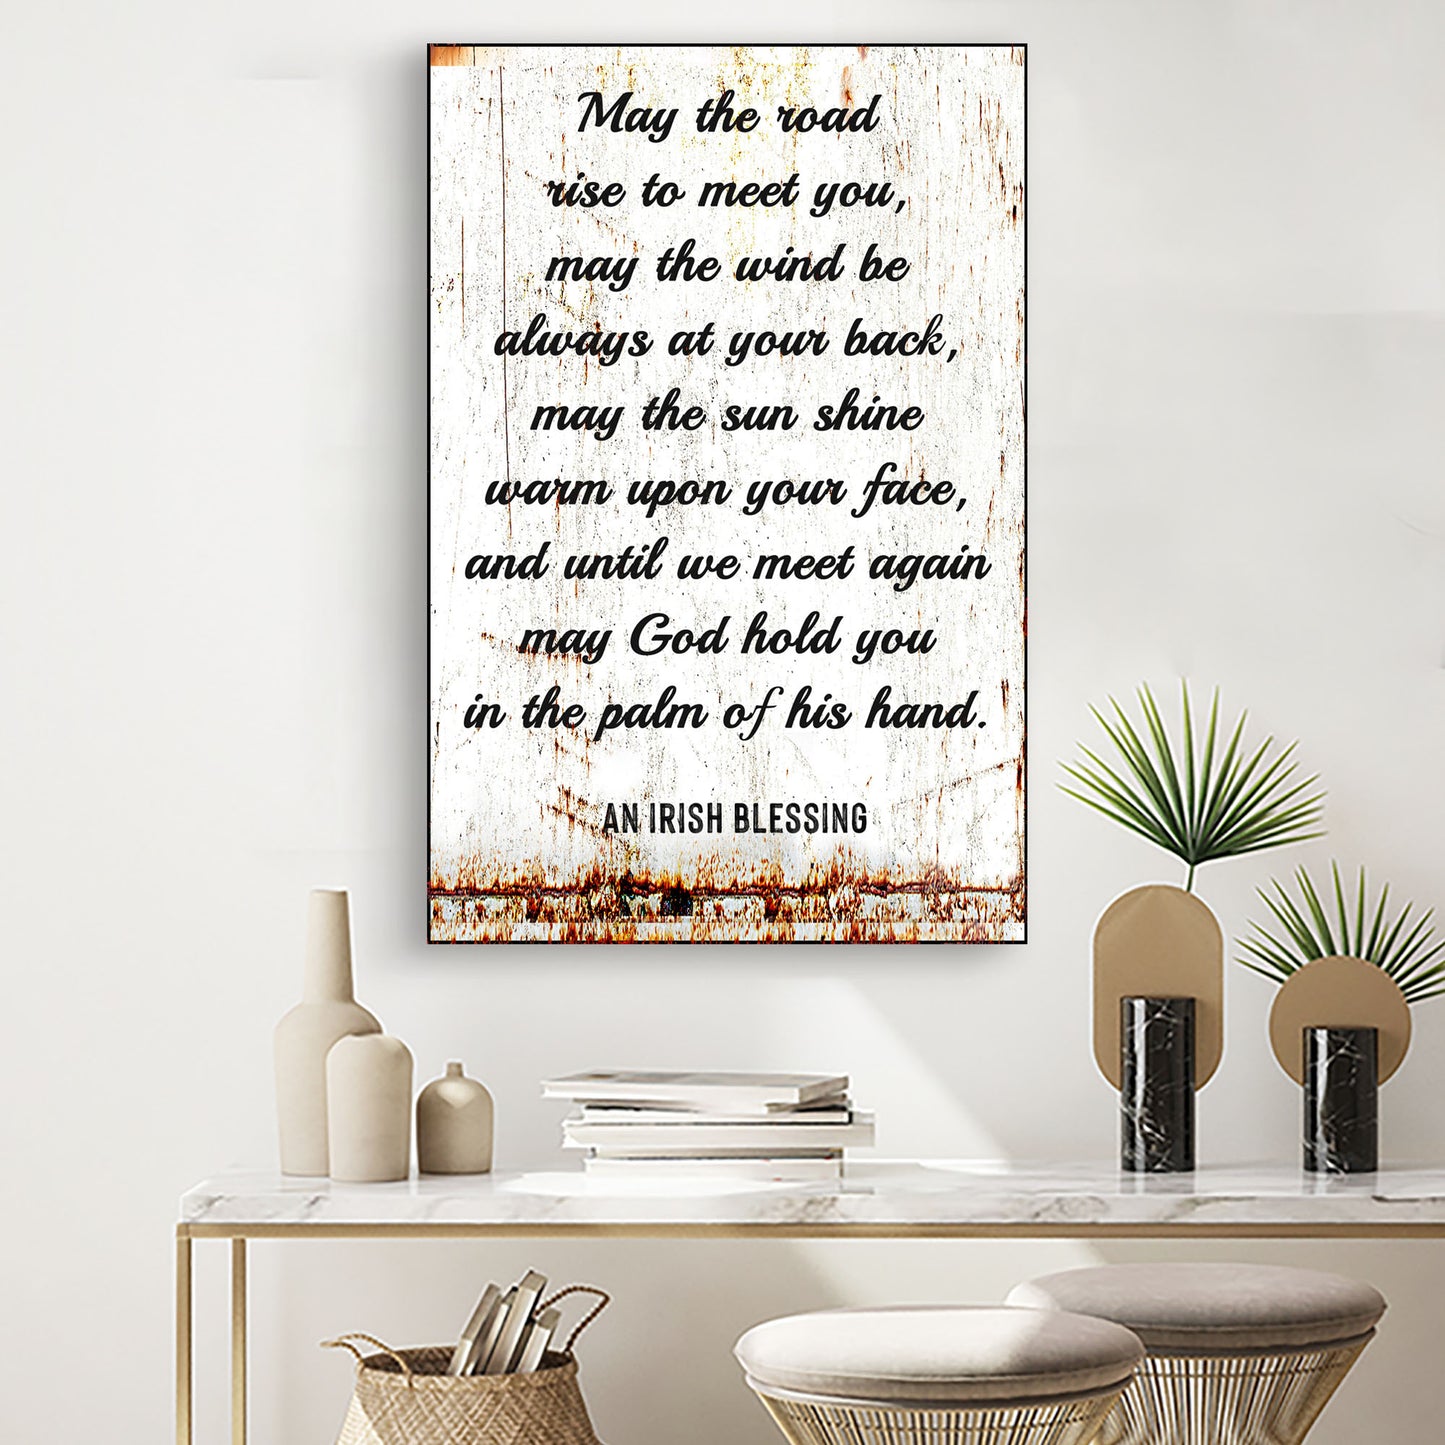 An Irish Blessing Portrait Sign - Image by Tailored Canvases